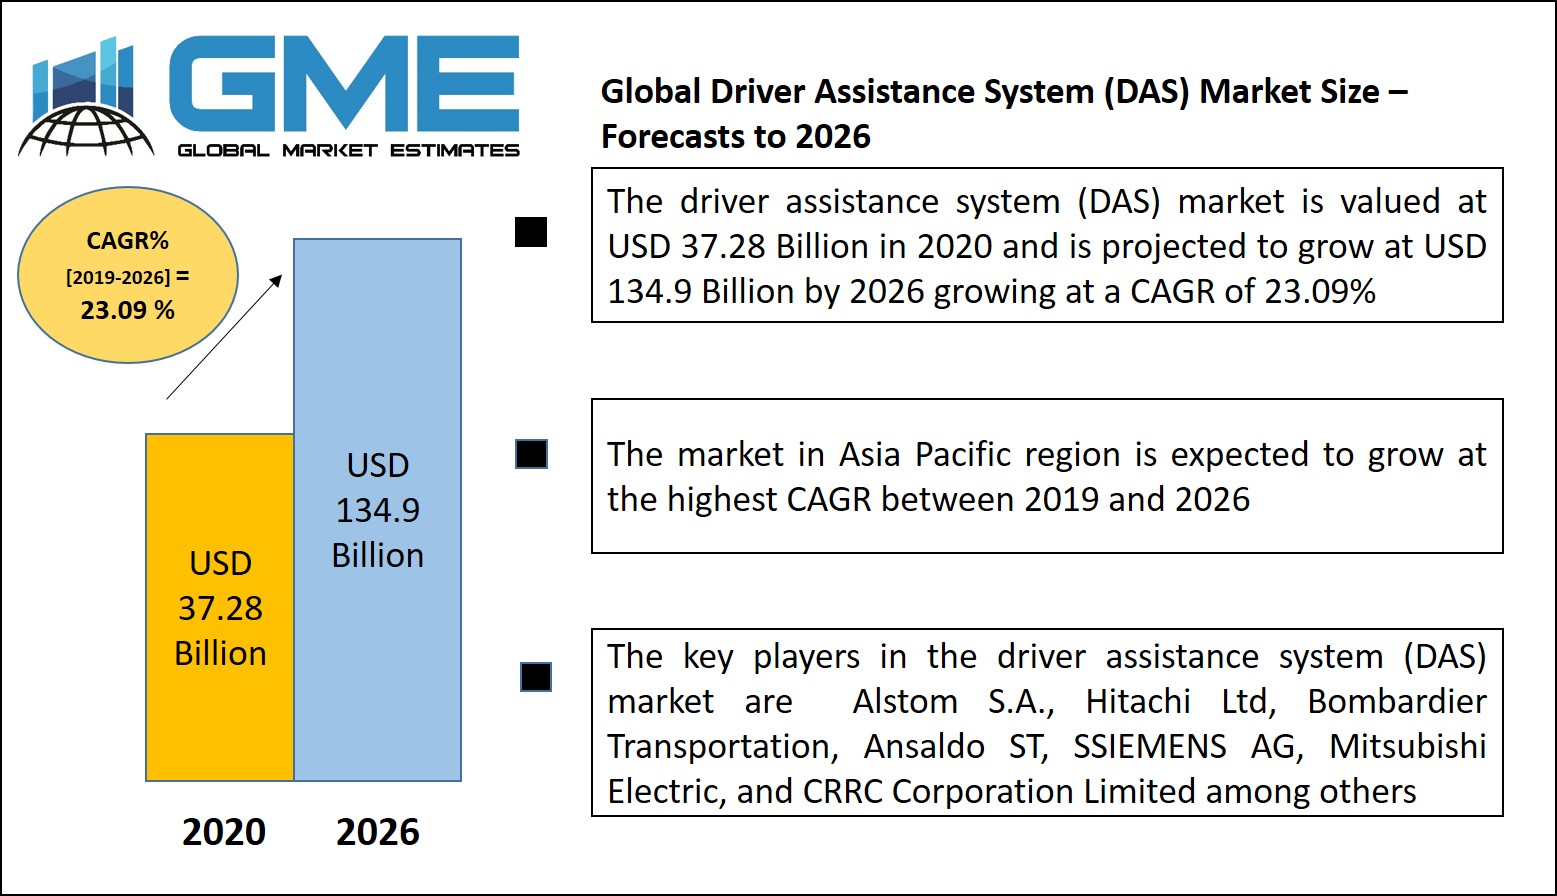 Global Driver Assistance System (DAS) Market Size – Forecasts to 2026